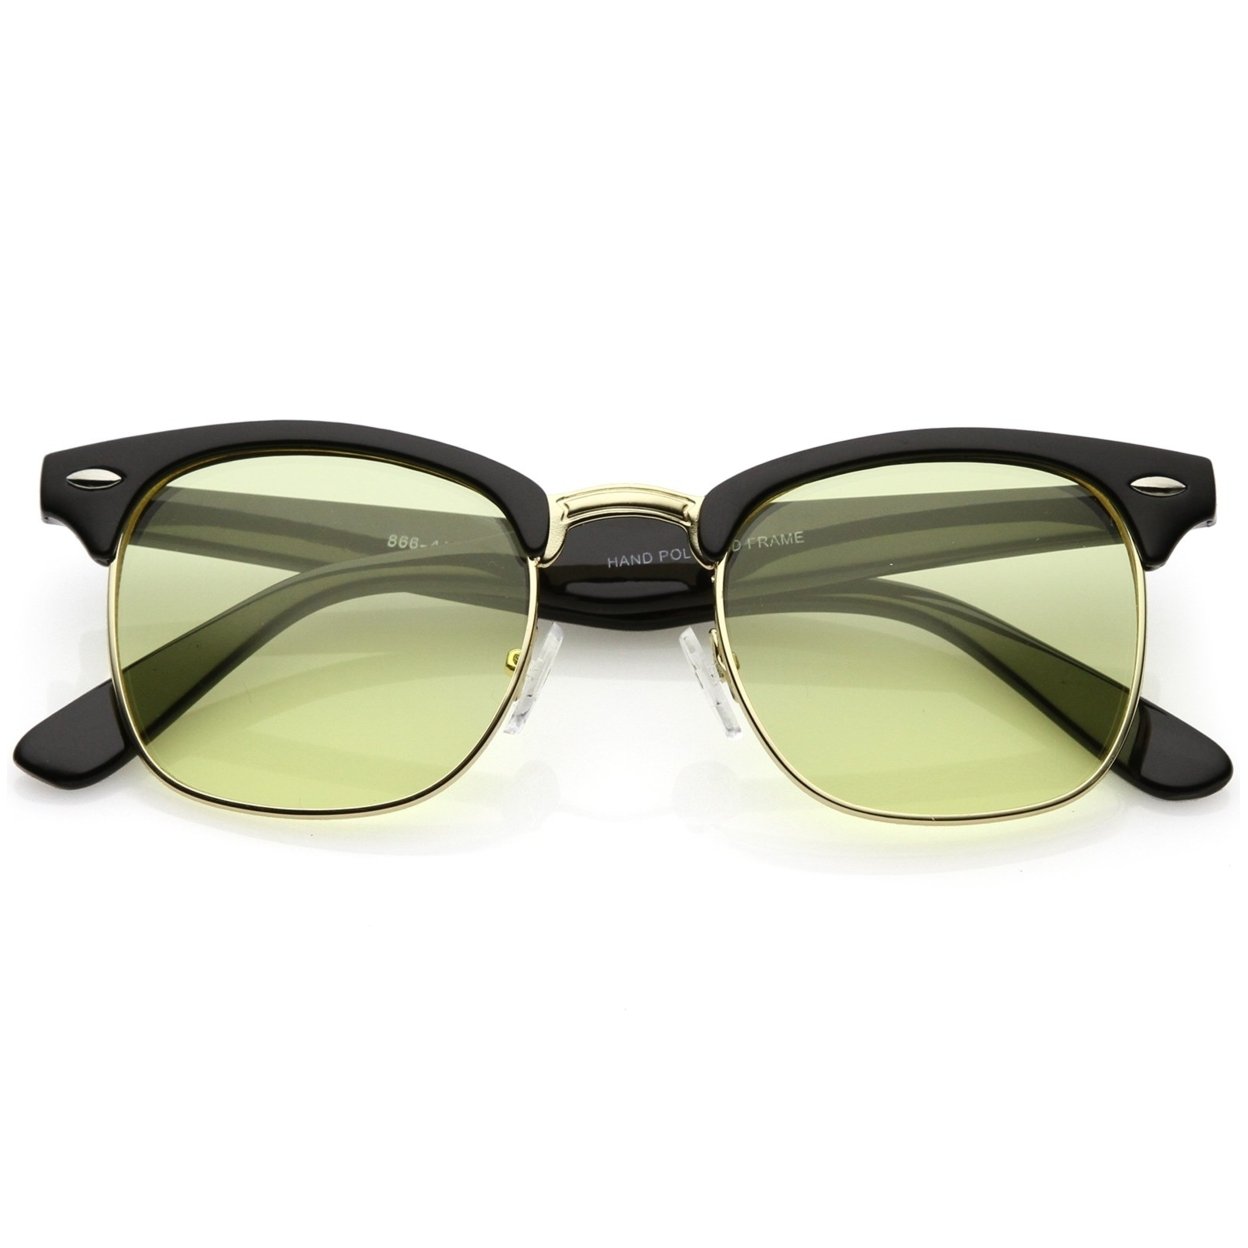 Modern Horn Rimmed Sunglasses Semi Rimless Color Tinted Square Lens 49mm - Black Gold / Yellow